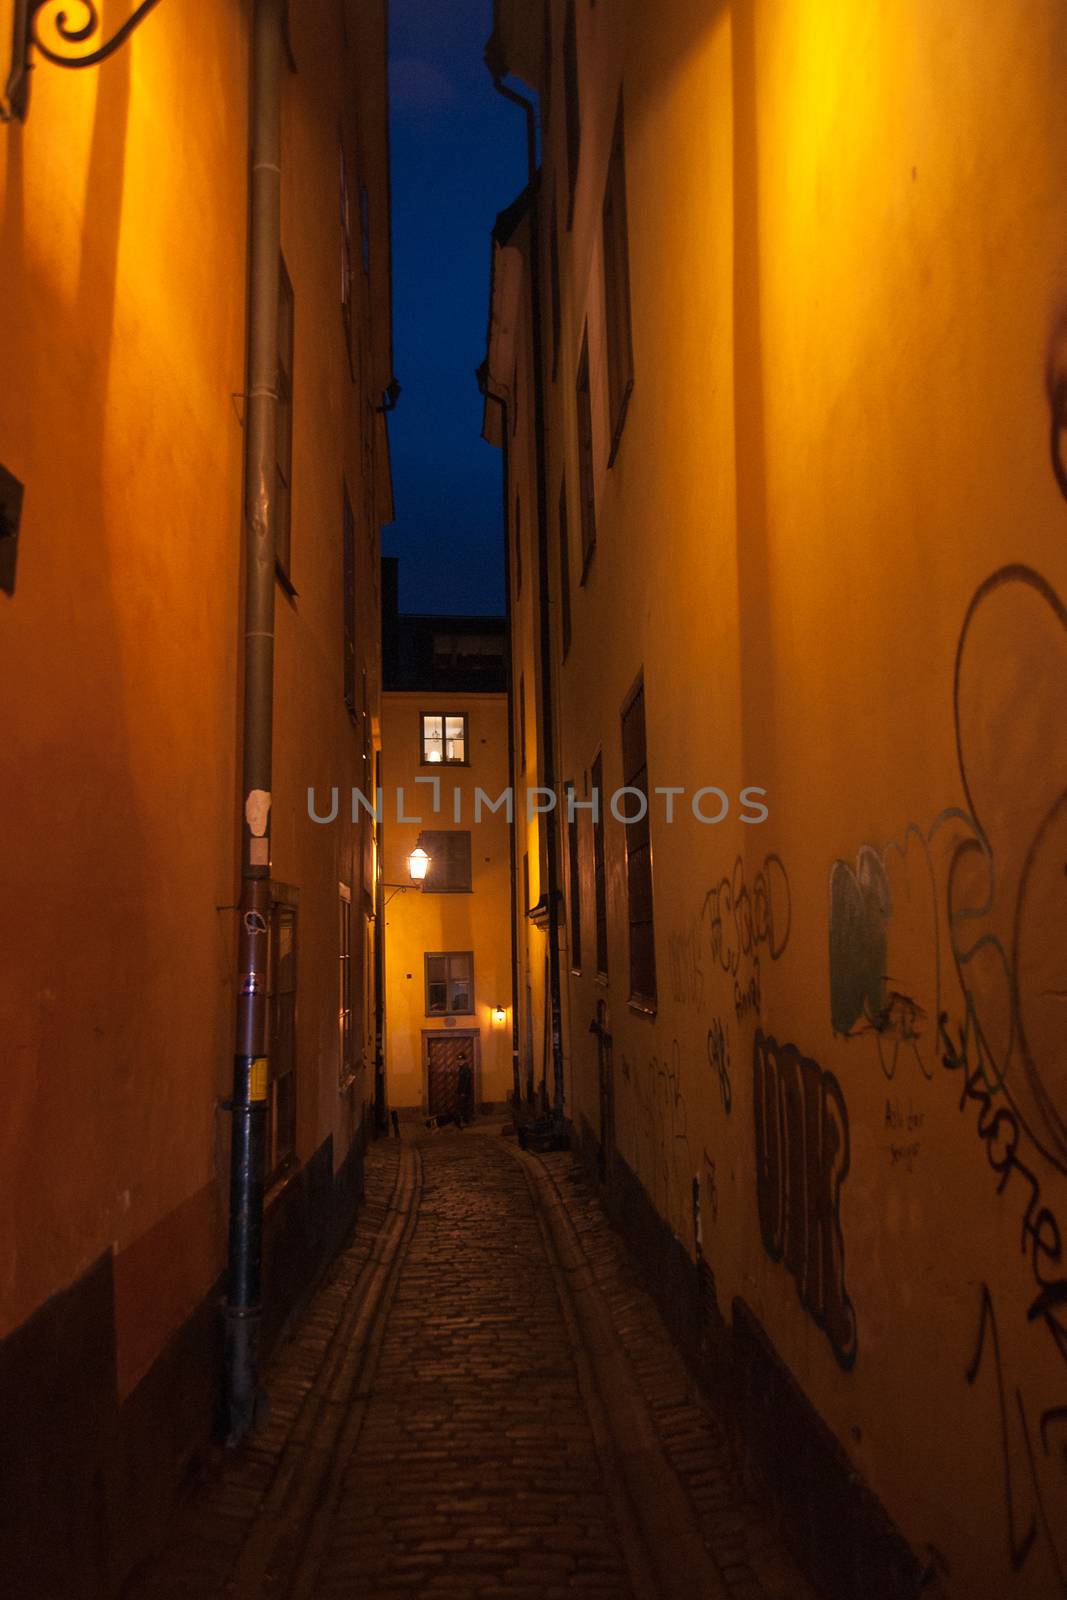 Stockholm old city at night by javax